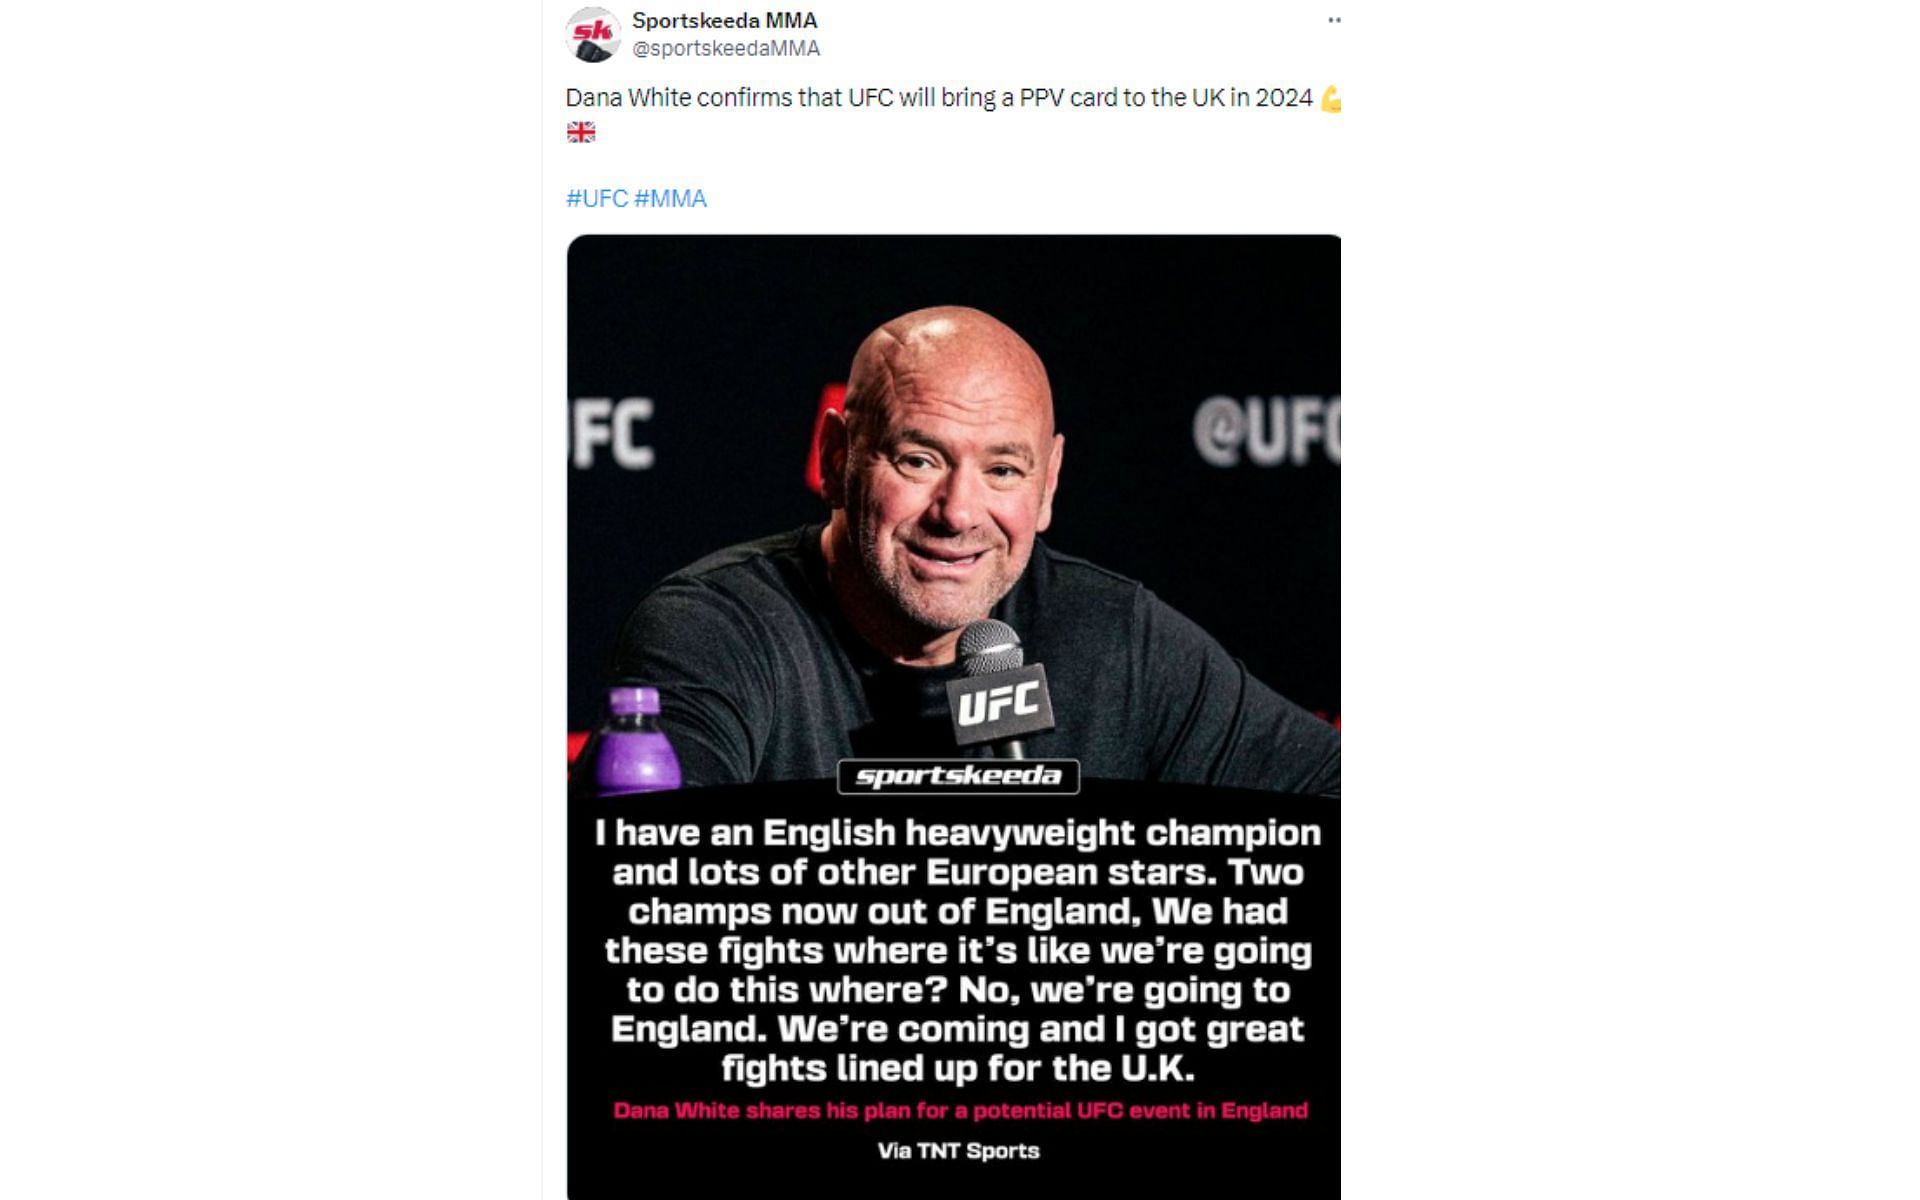 Tweet regarding White&#039;s comments on UFC pay-per-view in the UK [Image courtesy: @sportskeedaMMA - X]